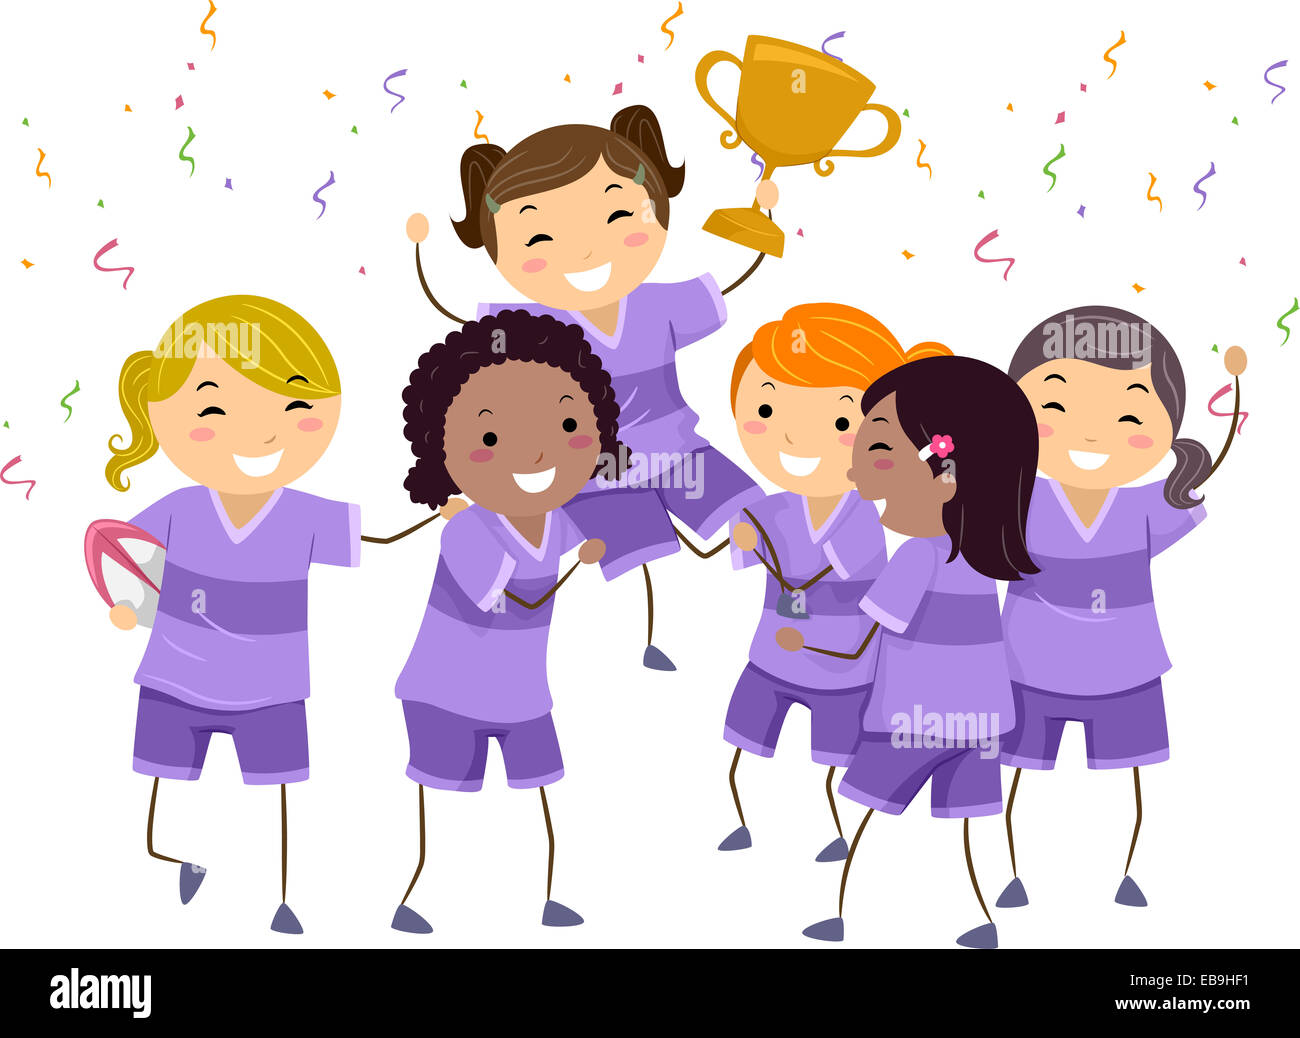 Illustration Featuring a Group of Girls Celebrating Their Championship Win Stock Photo